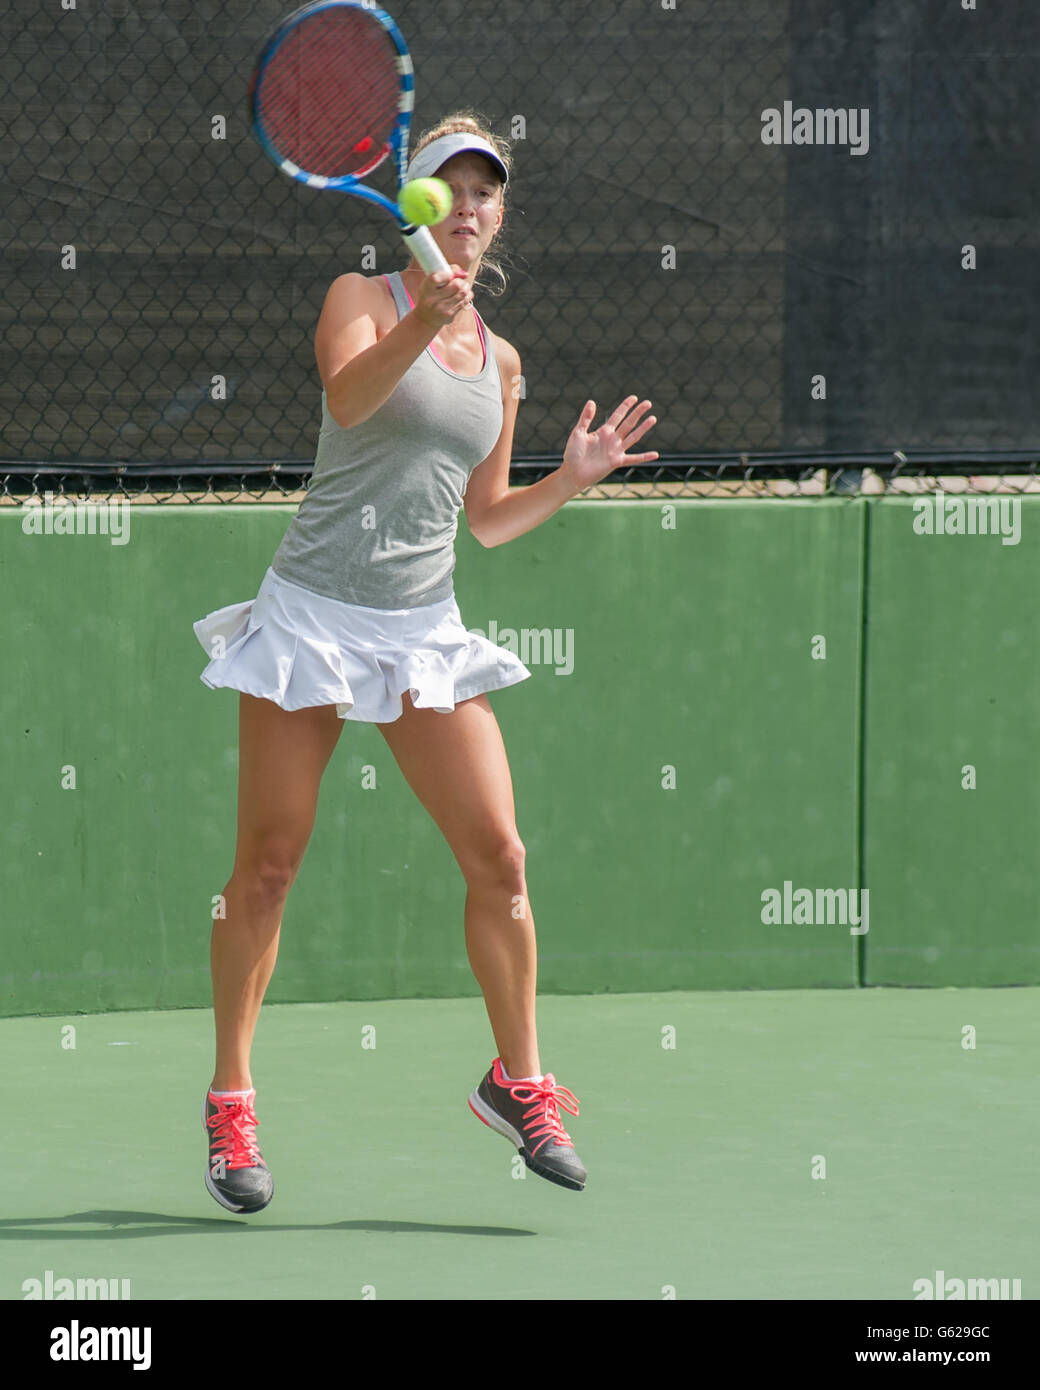 Female tennis player focused on her forehand. Stock Photo